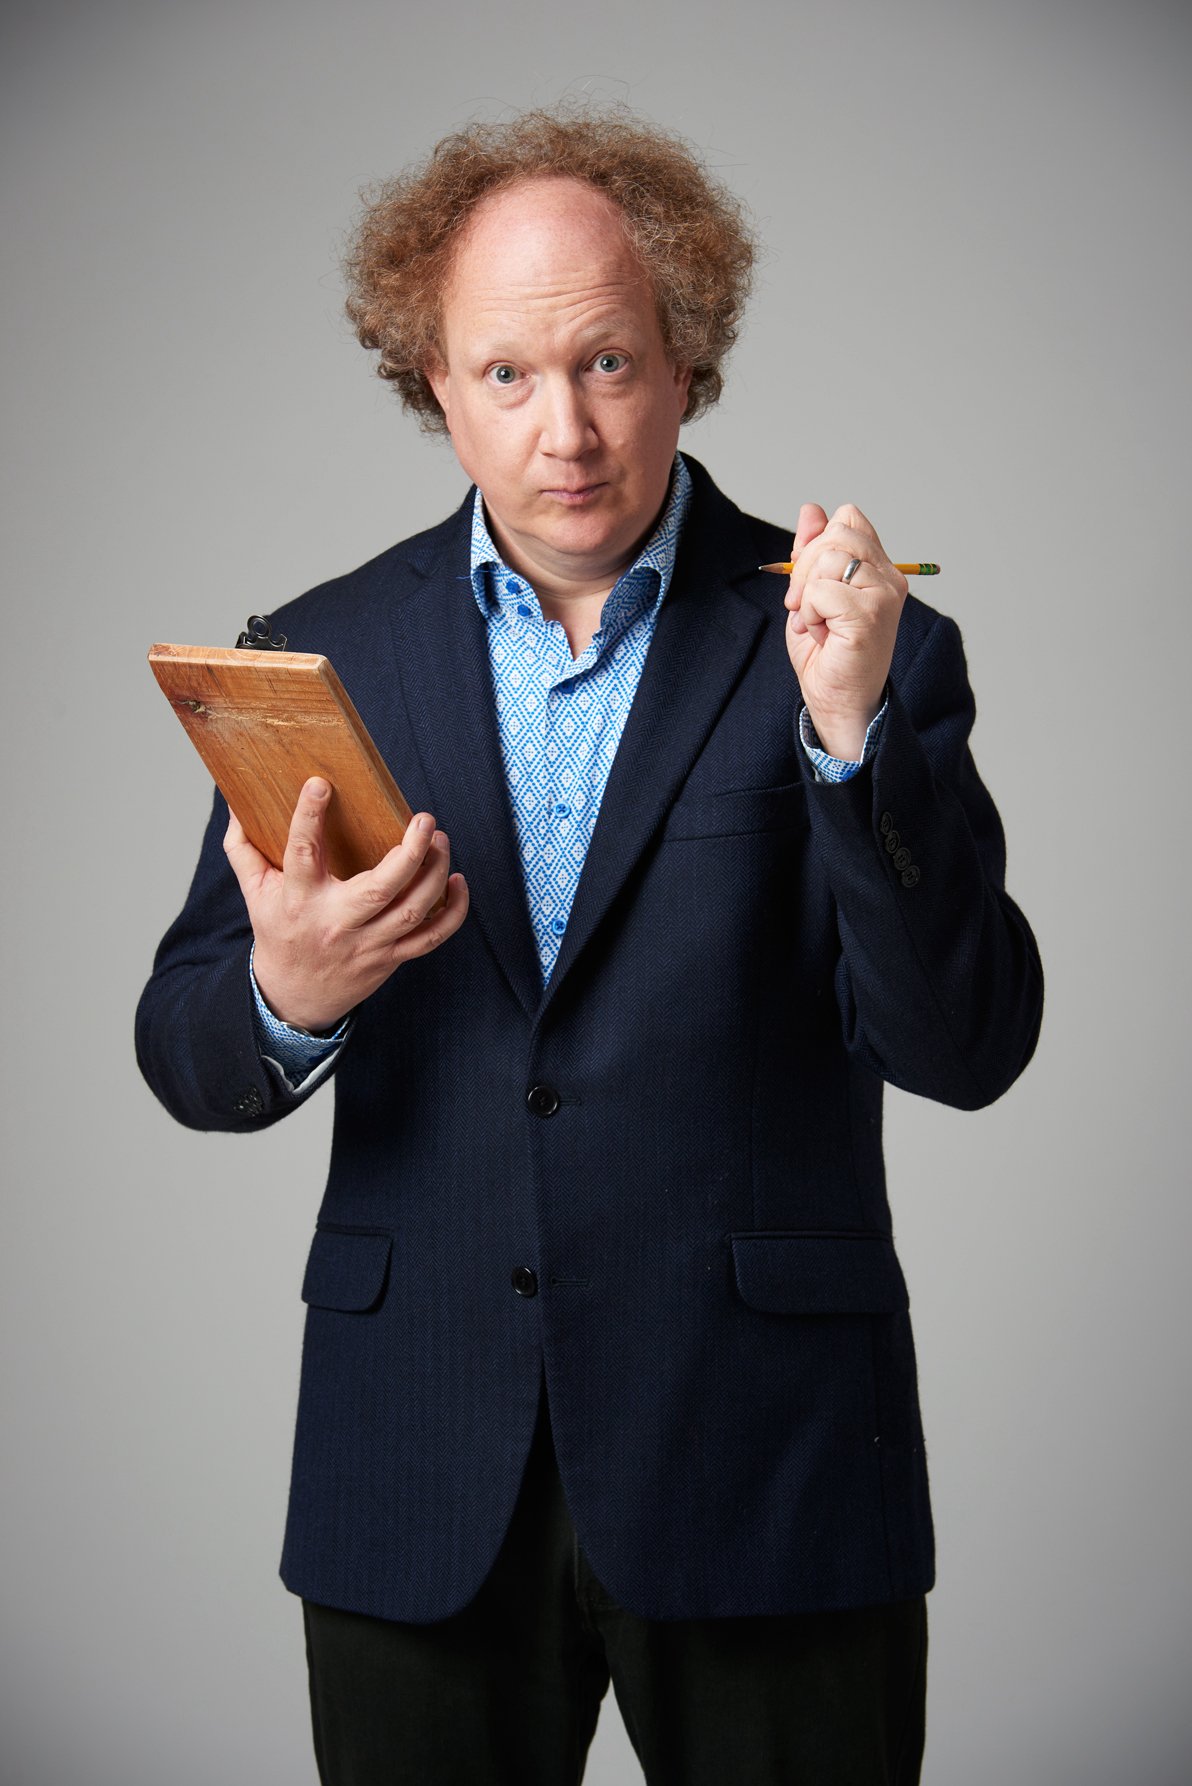  Andy Zaltzman - a white, balding older man with curly brown hair - looks quizically up from his clipboard and at the camera. 